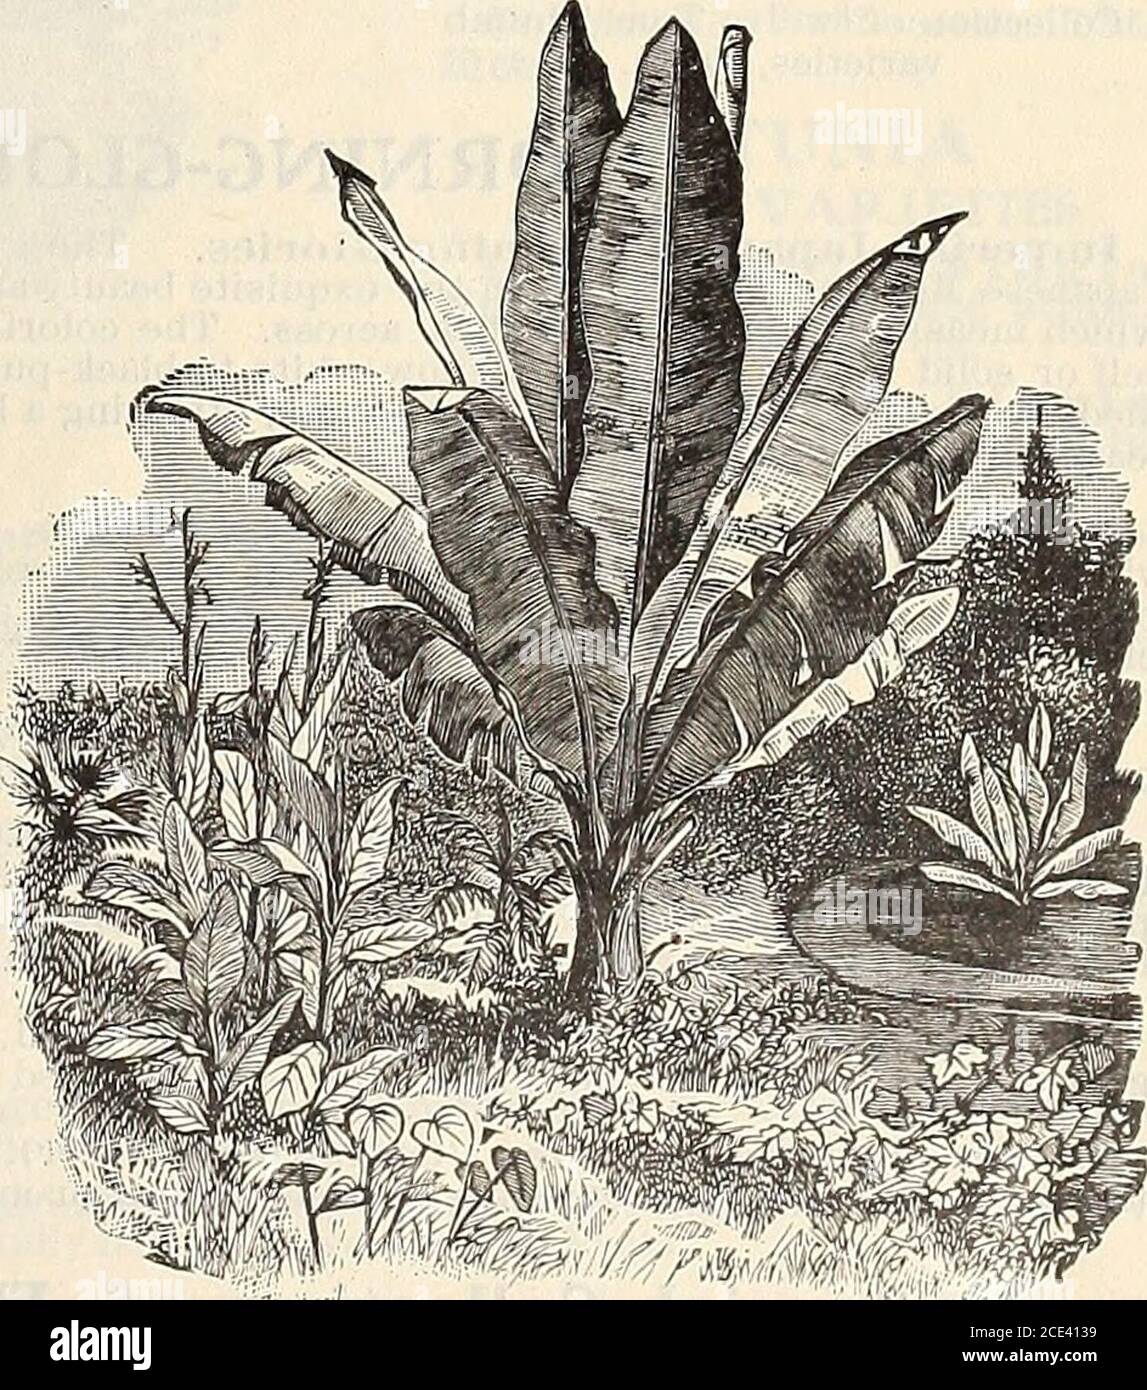 . Seeds . liage and golden yellow fruits, whichopen when ripe, exposing a carmine interior.Balsamina (Balsam Apple). Pkt. 5 cts. Charantia (Balsam Pear). Pkt. 5 cts. M!USA ENSETE (Abyssinian Banana) A magnificent foliage plant for the open ground in the summer or for the green-house or conservatory in winter. Seeds sown early in the house will produce largeplants the first season. Pkt. 25 cts. Mina I,obata MAURANDYA These charming climbers cannot be too highly praisedfor their beautiful flowers and foliage, From their grace-ful slender growth they are admirably adapted for hangingbaskets, vase Stock Photo